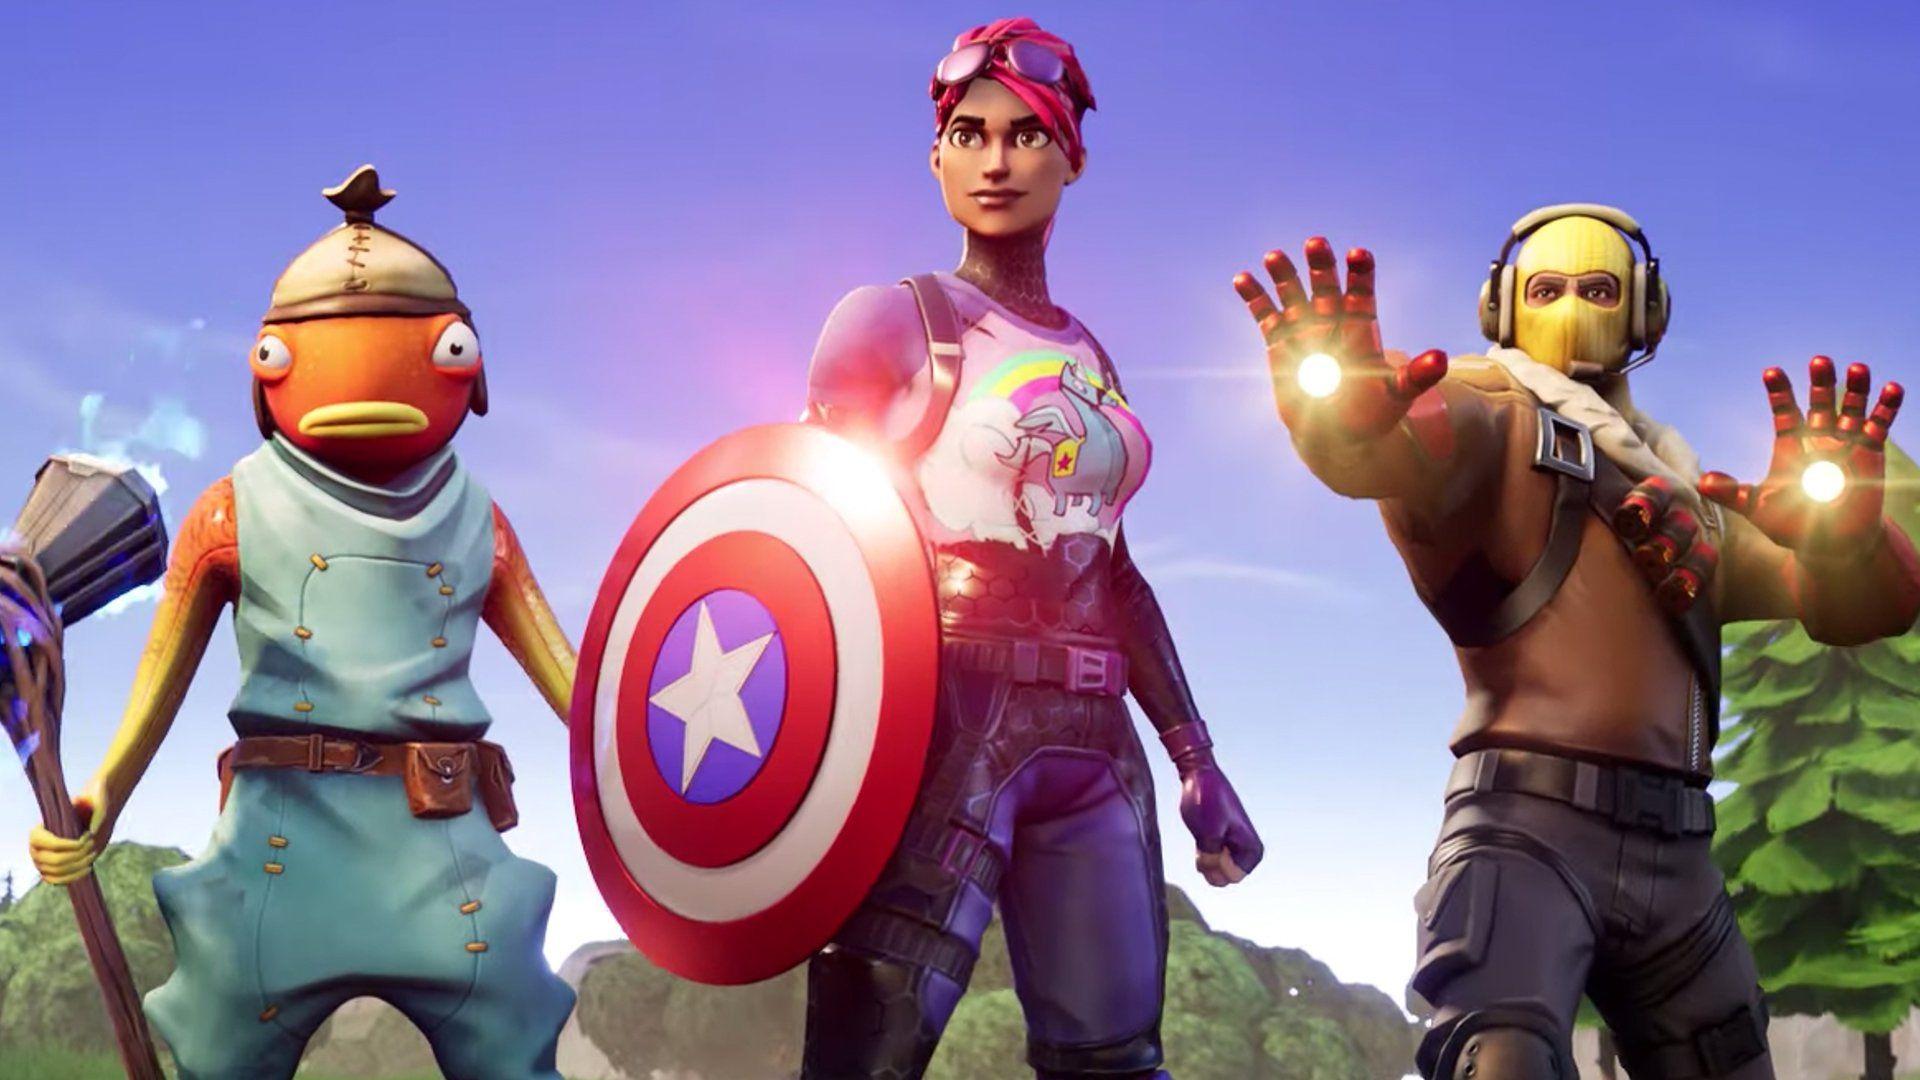 Captain America's shield has appeared in Fortnite before, during the Avengers Endgame crossover last year.